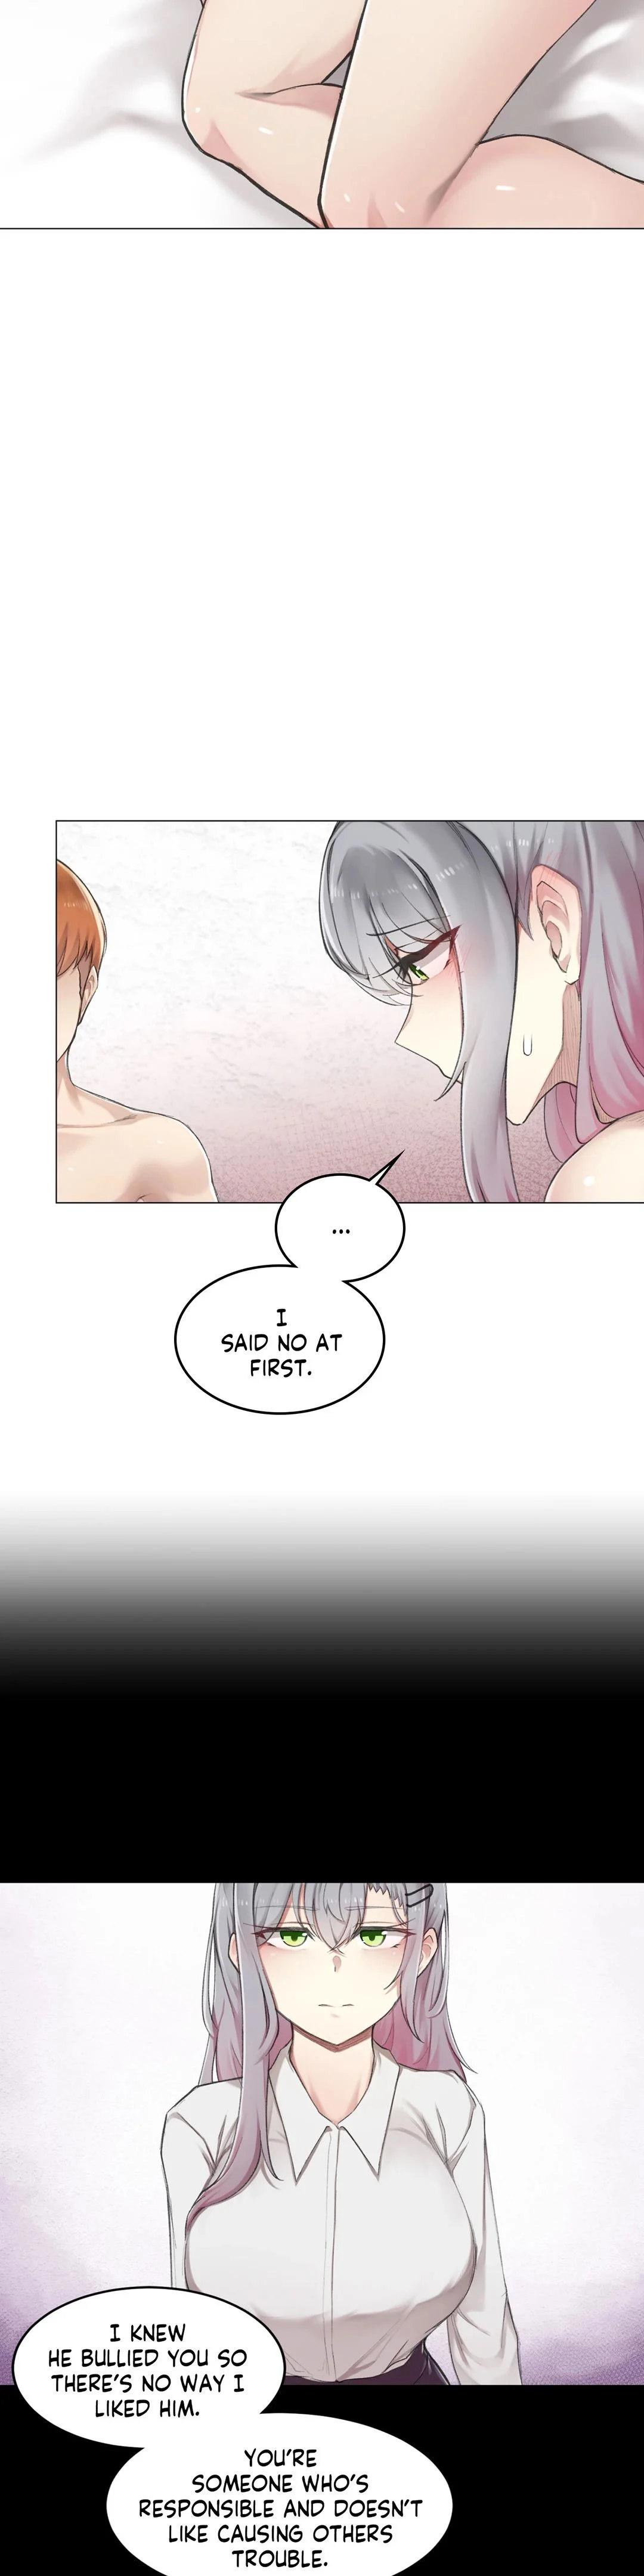 [Dumangoon, KONG_] Sexcape Room: Snap Off Ch.7/7 [English] [Manhwa PDF] Completed 169